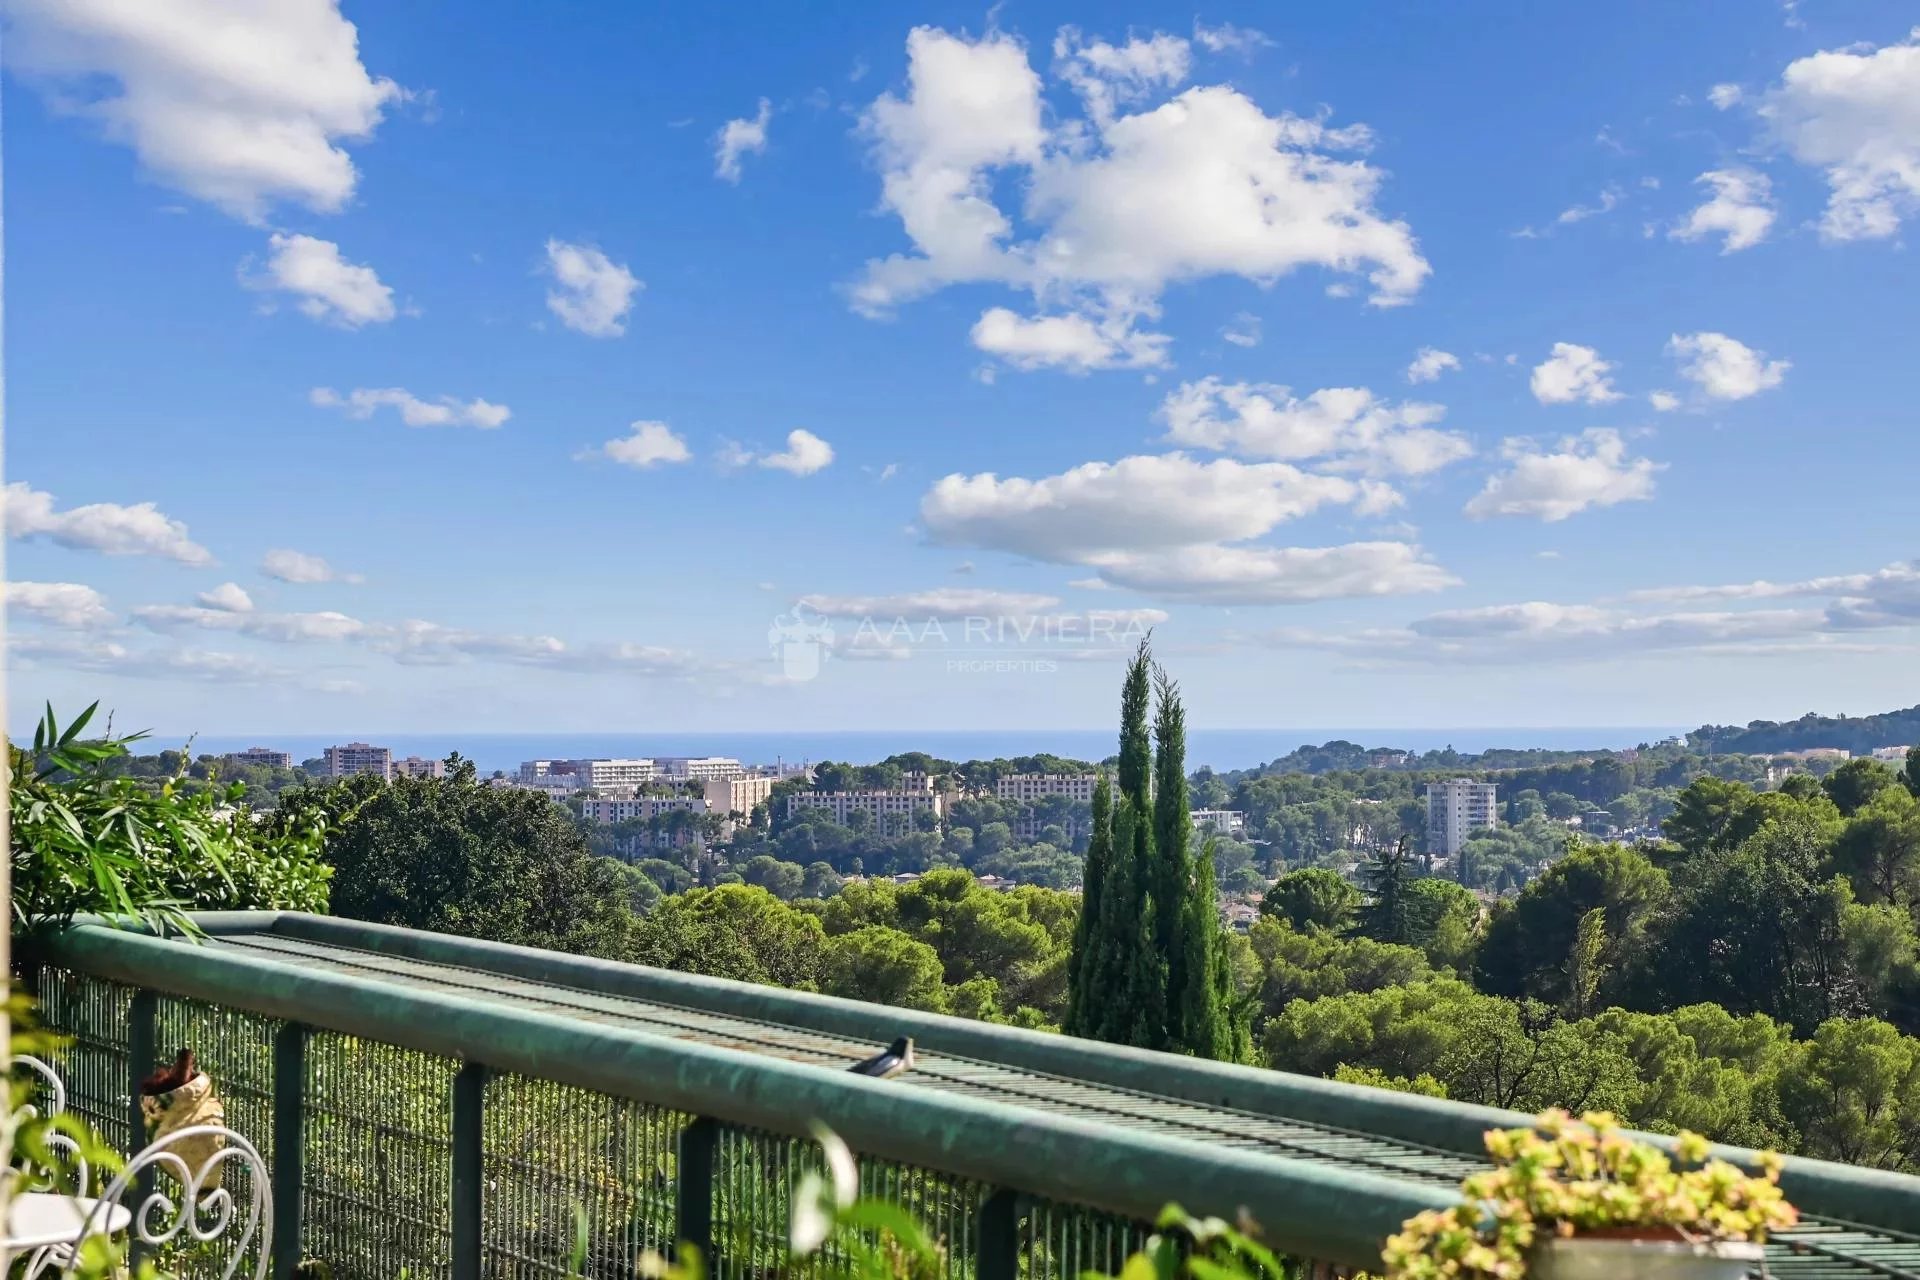 SOLD - Close to Mougins village with all the shops at your doorstep set in green surroundings